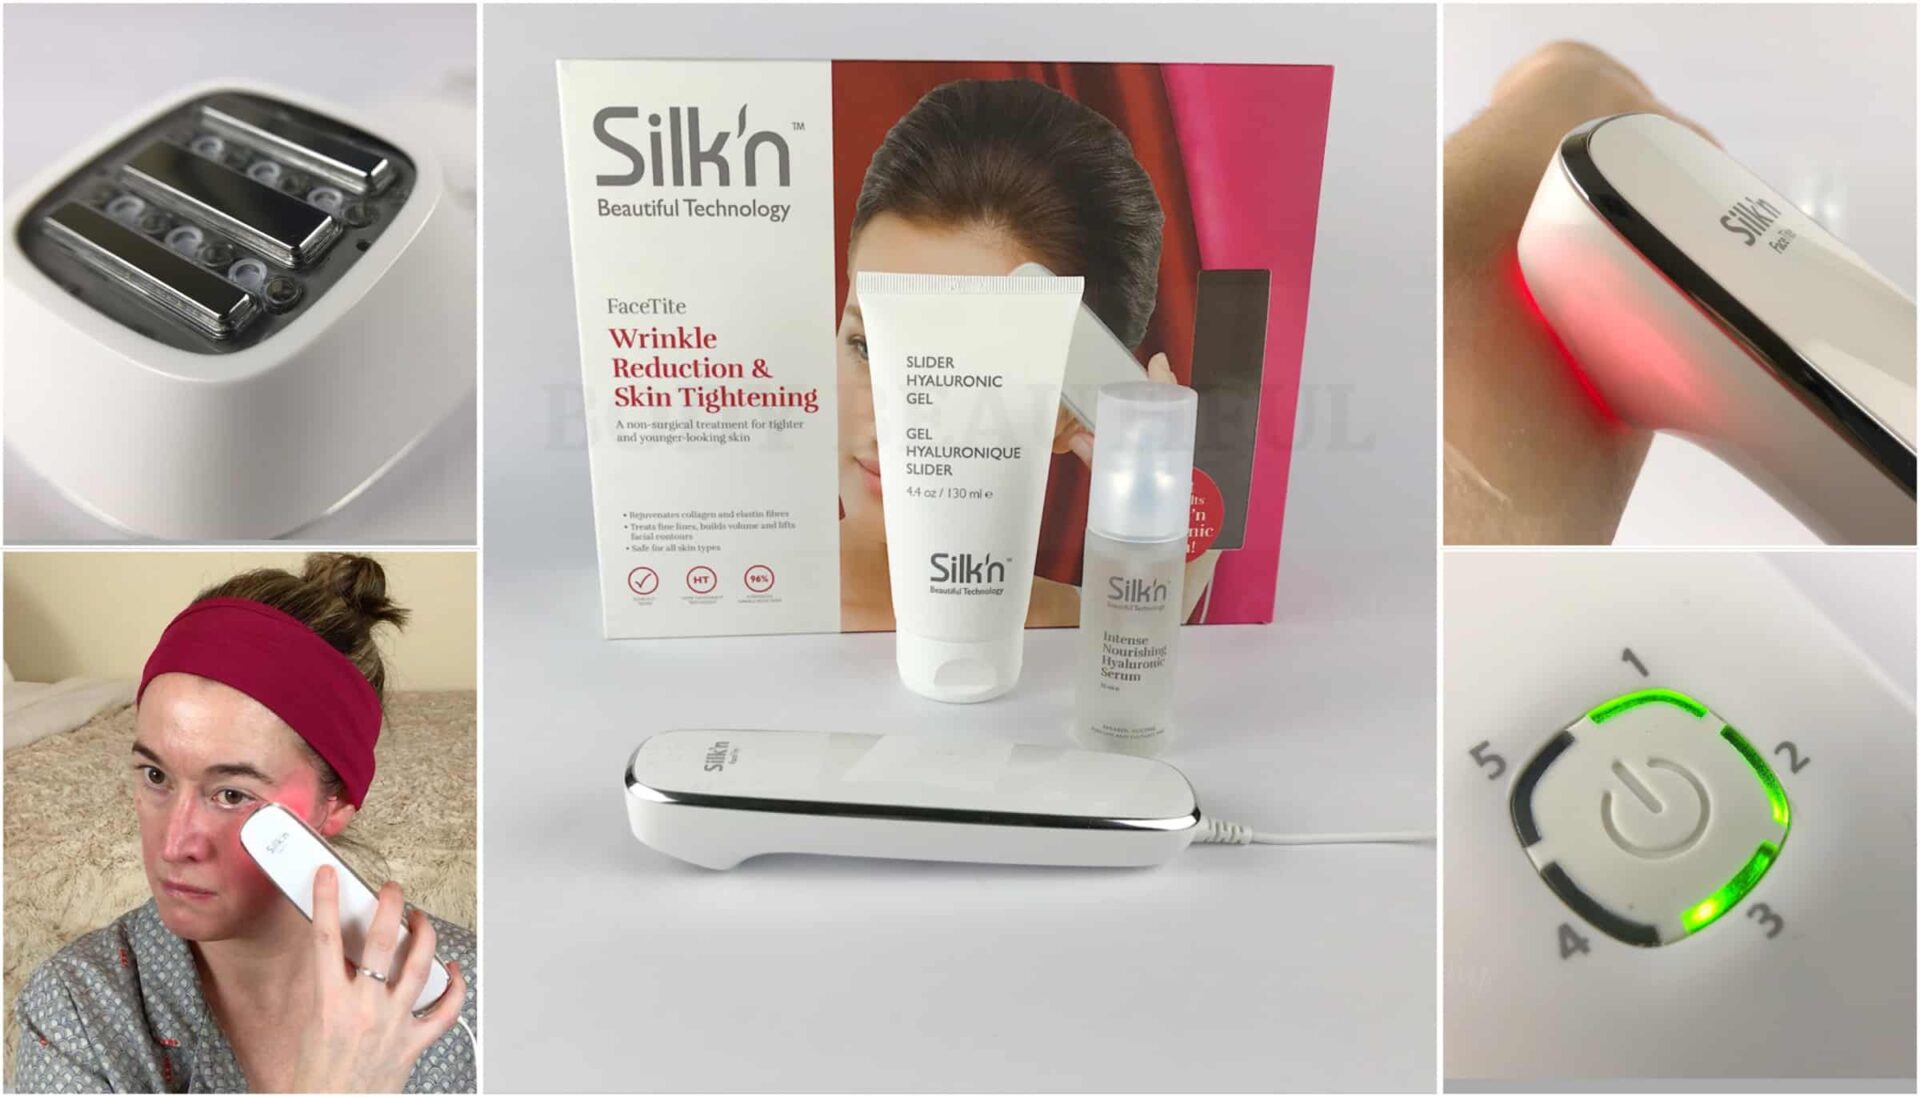 Tried & tested Silk'n FaceTite RF & LED light home use device - read the review!